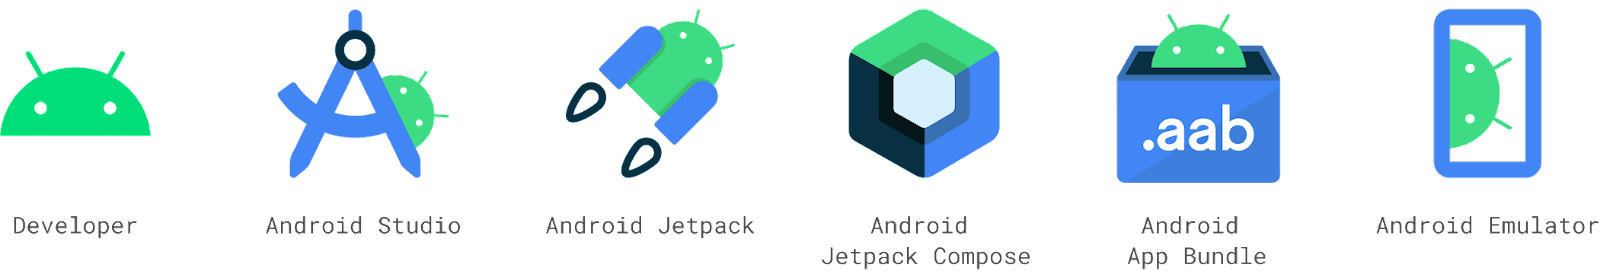 images of the Android logo family across Developer, Android Studio, Jetpack, Jetpack Compose, App Bundle, and Emulator